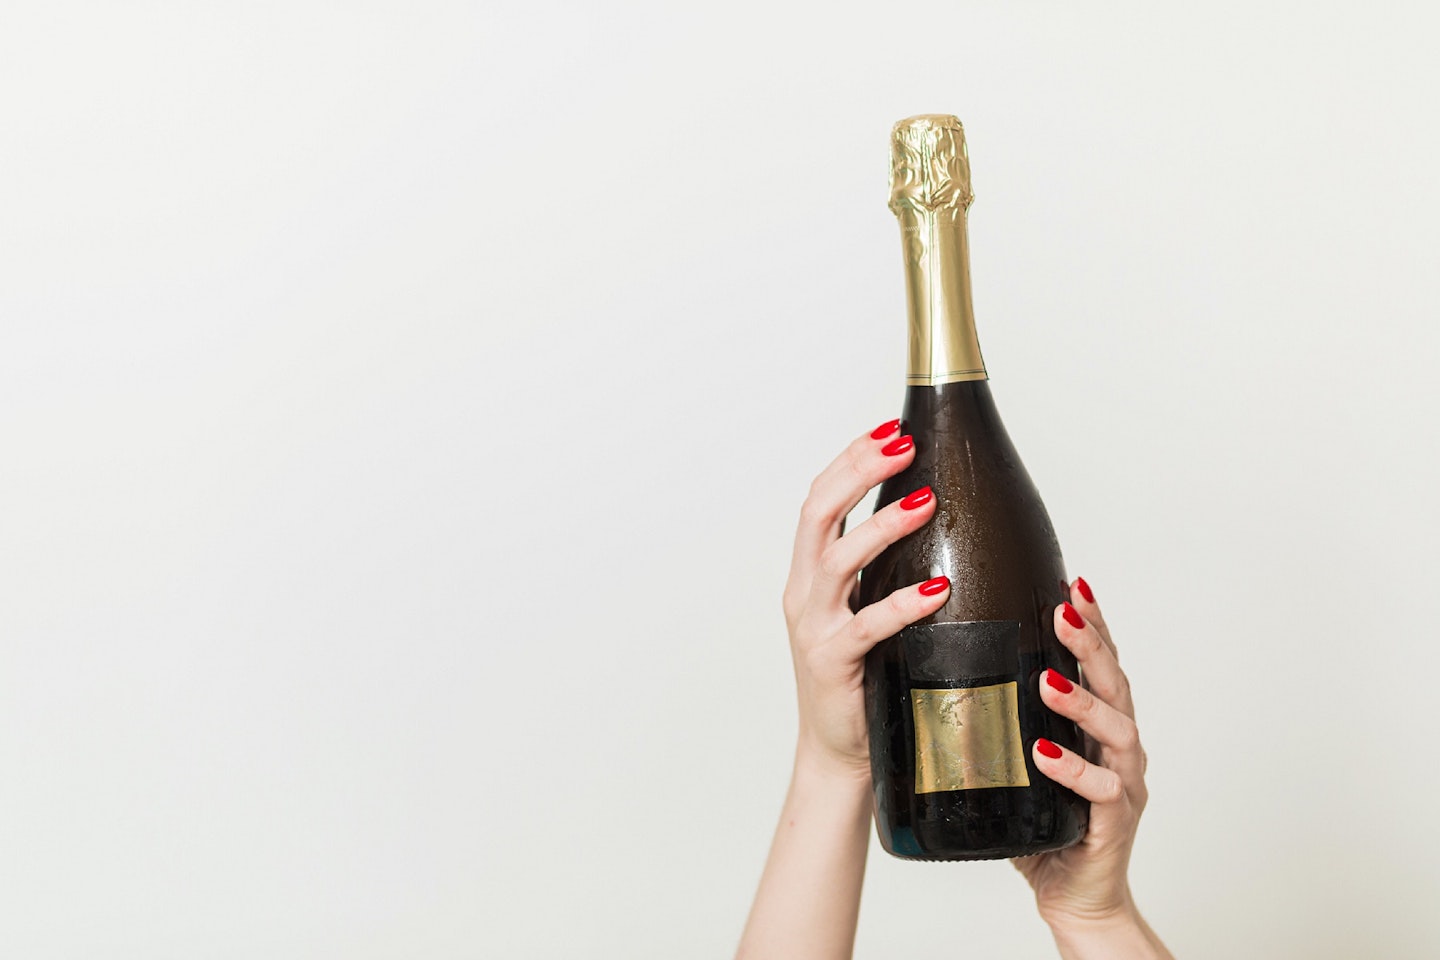 Hands holding up Prosecco bottle